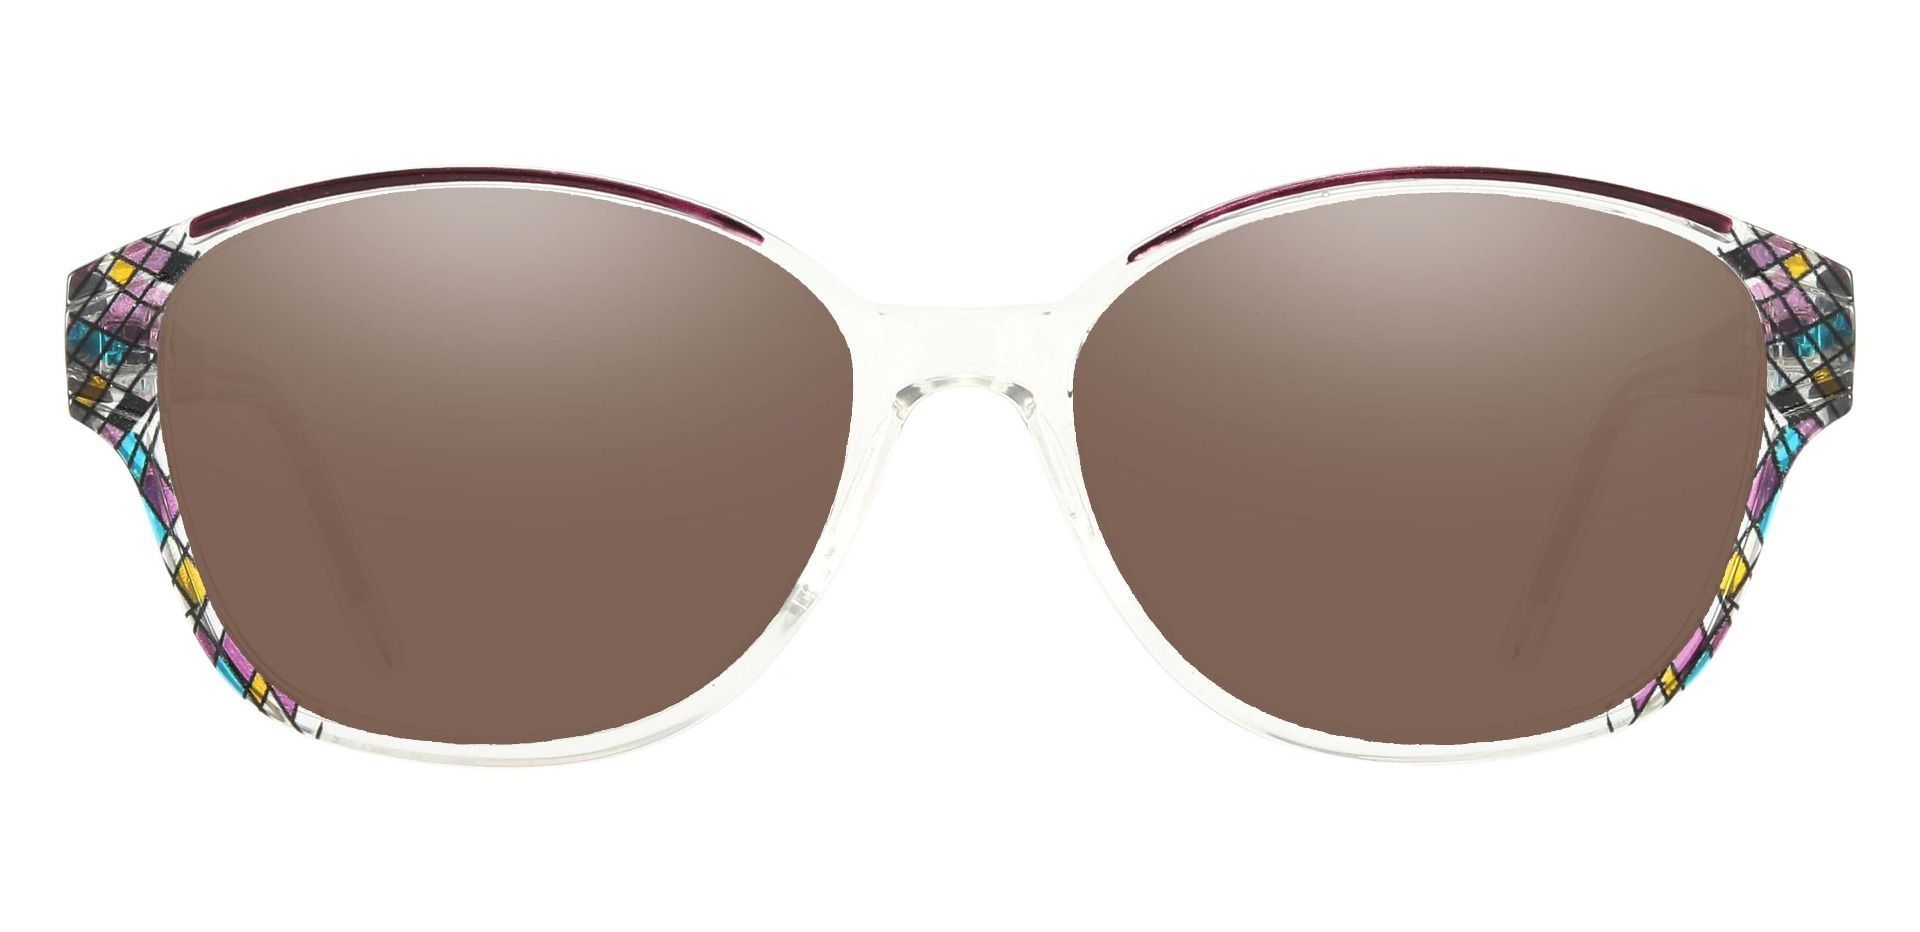 Moira Oval Non-Rx Sunglasses - Purple Frame With Brown Lenses